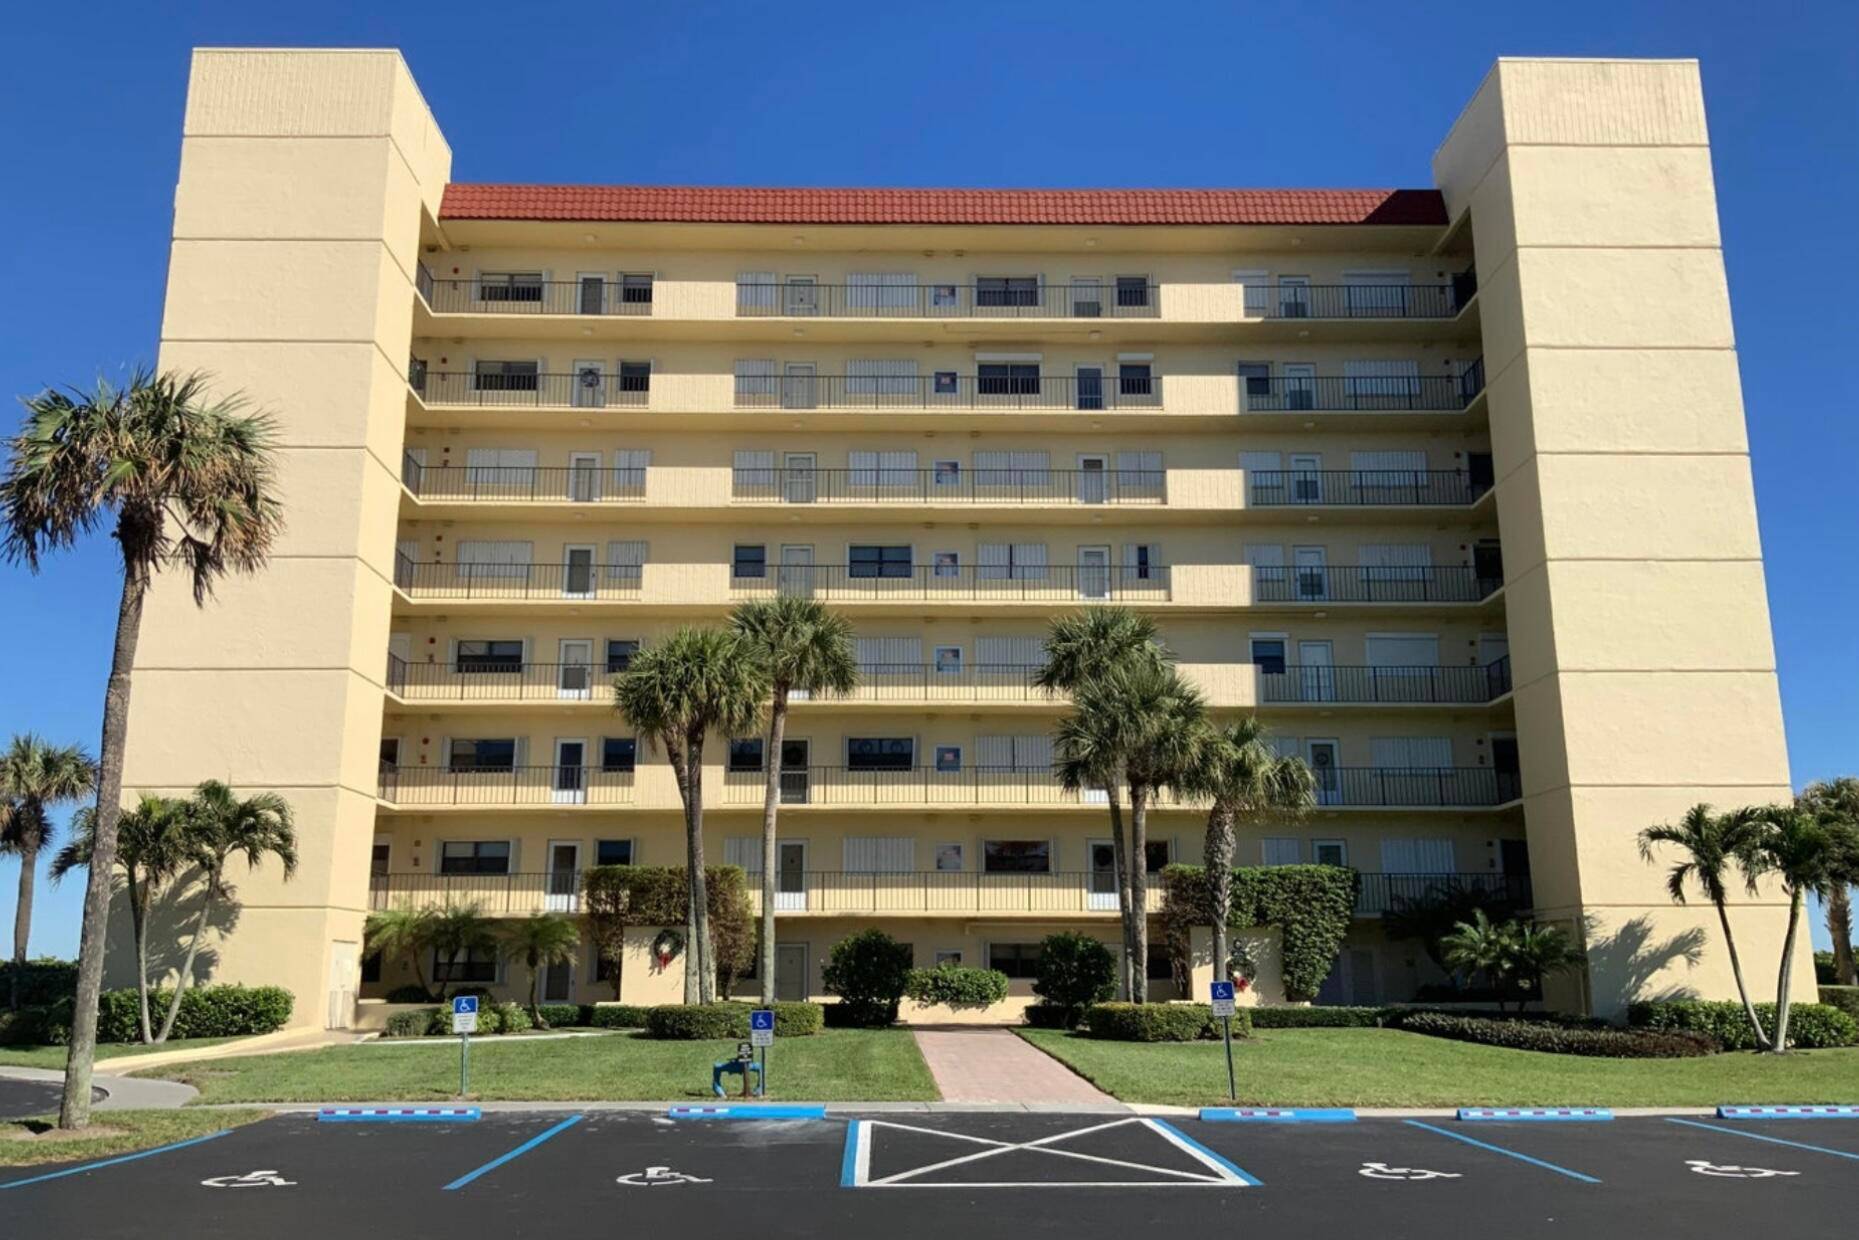 SOUTHEAST CORNER UNIT, BEAUTIFUL FURNISHED BRAND NEW, COMPLETELY REMODELED, SAND DOLLAR HAS A FITNESS ROOM, CLUB HOUSE, POOL, OCEAN FRONT COMPLEX WITH TENNIS AND PICKLE BALL COURTS, ETC.